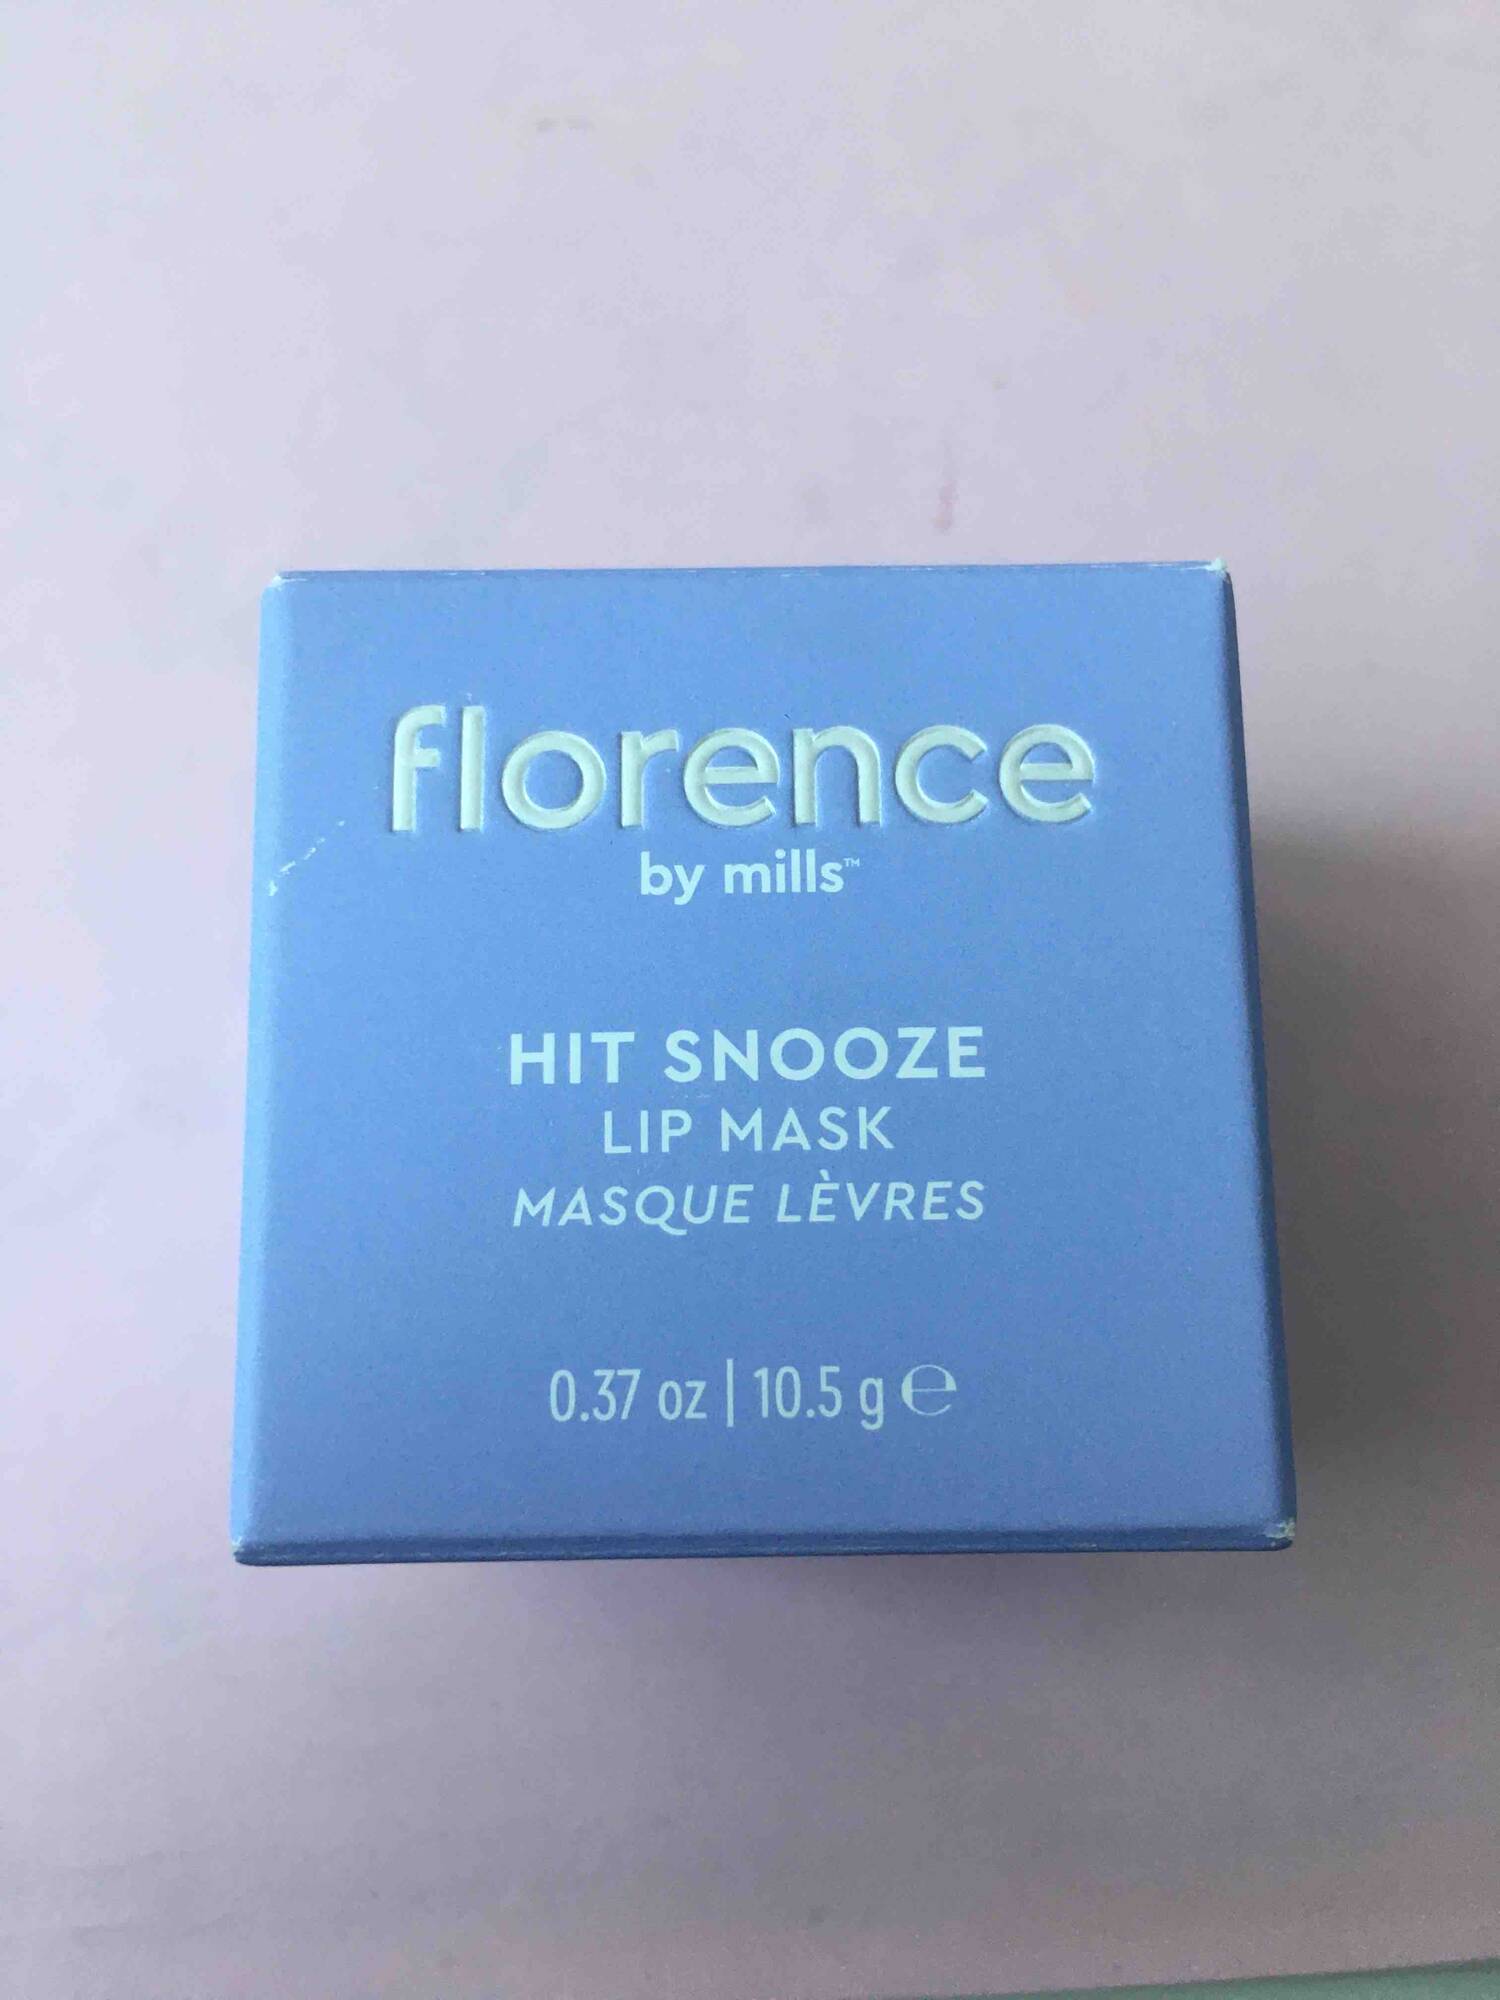 FLORENCE BY MILLS - Hit snooze - Masque lèvres